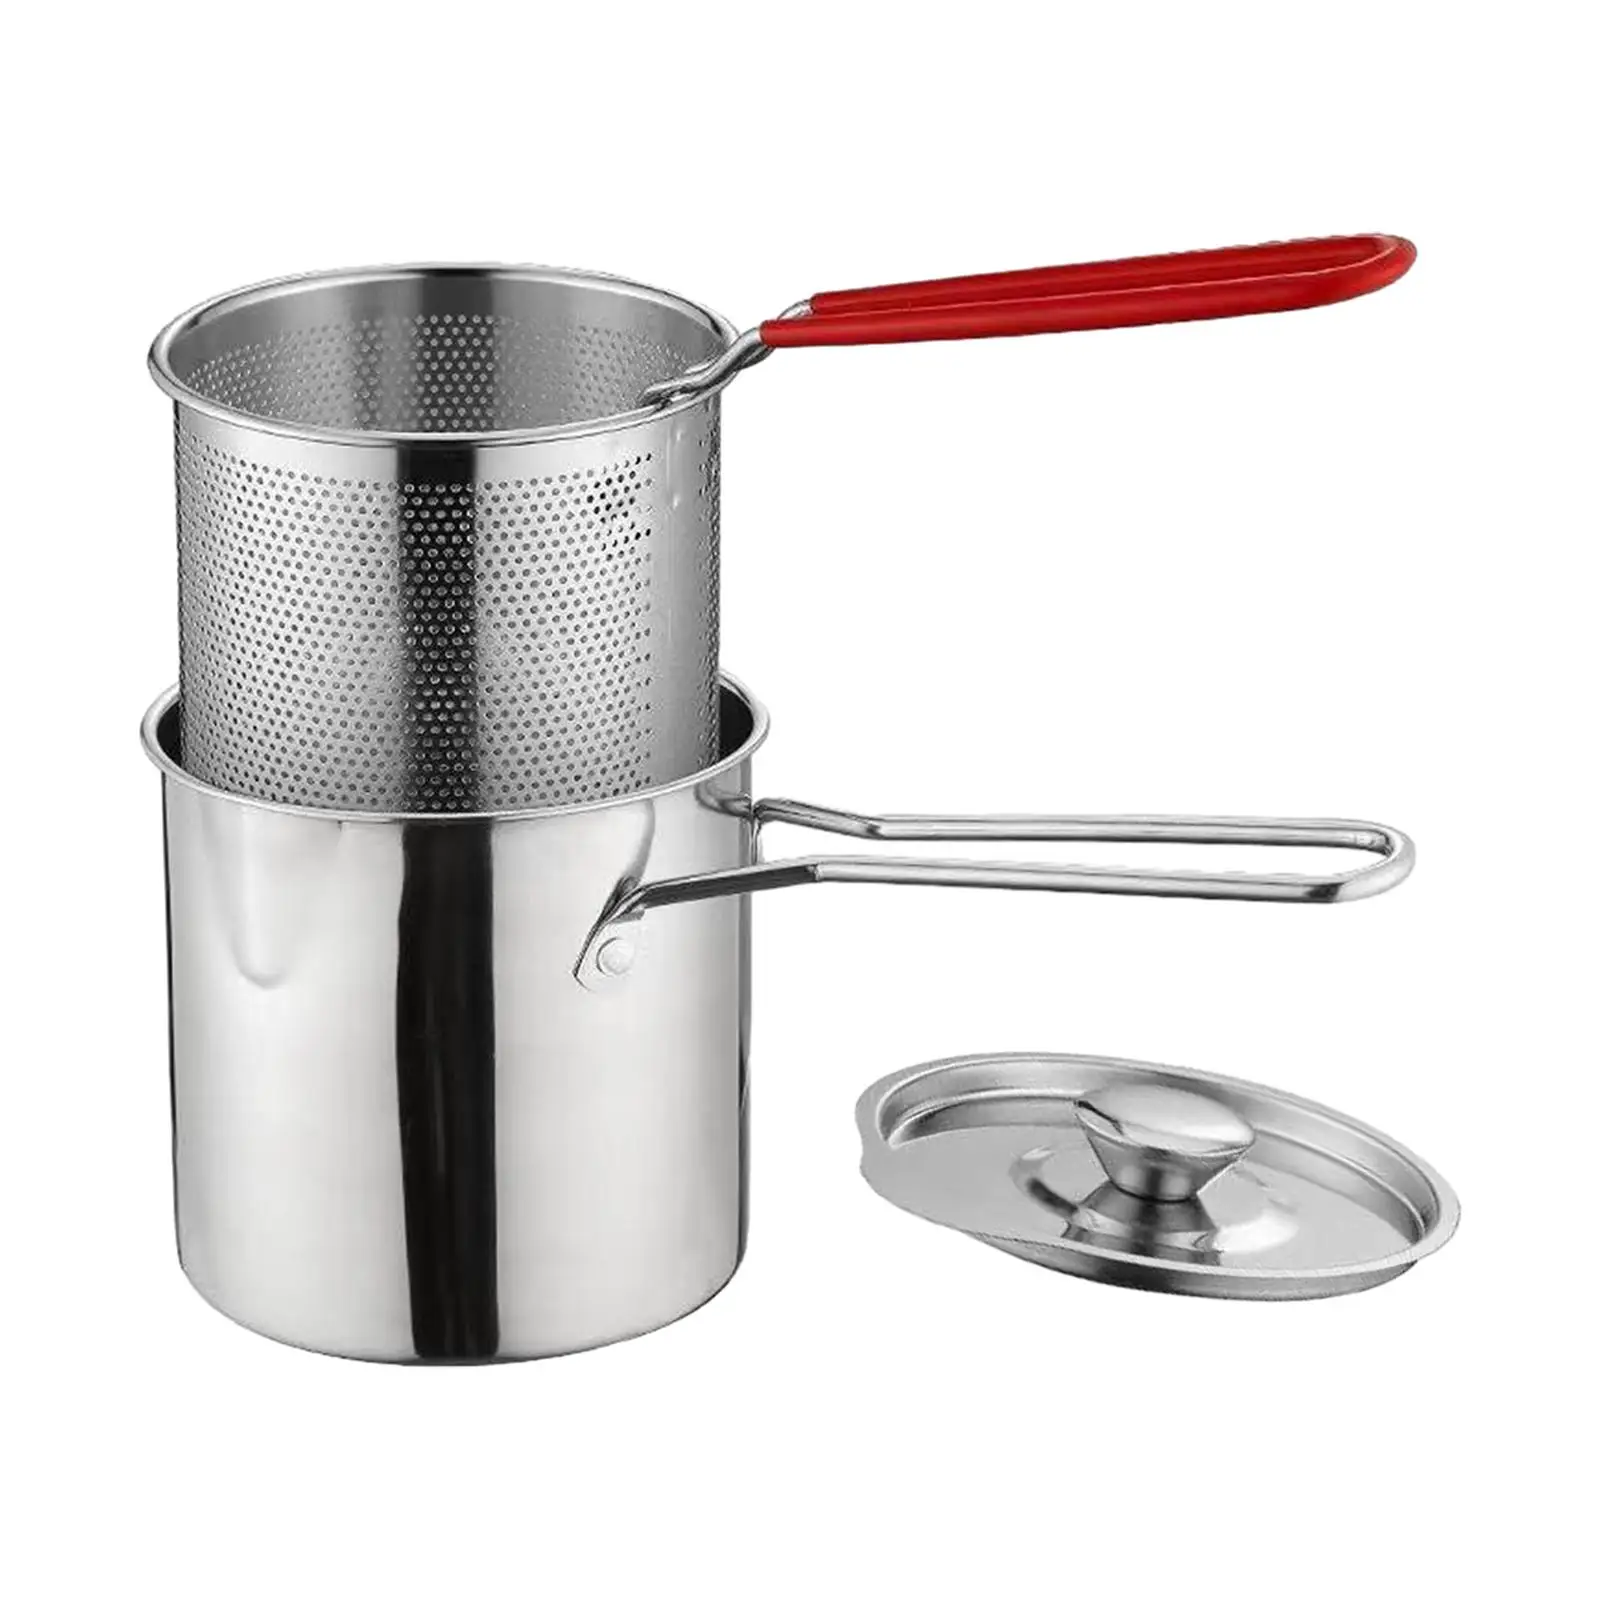 Deep Frying Pot Universal Milk Pot Cookware with Strainer Basket Frying Basket for Party Frying Cooking Kitchen Dining Room